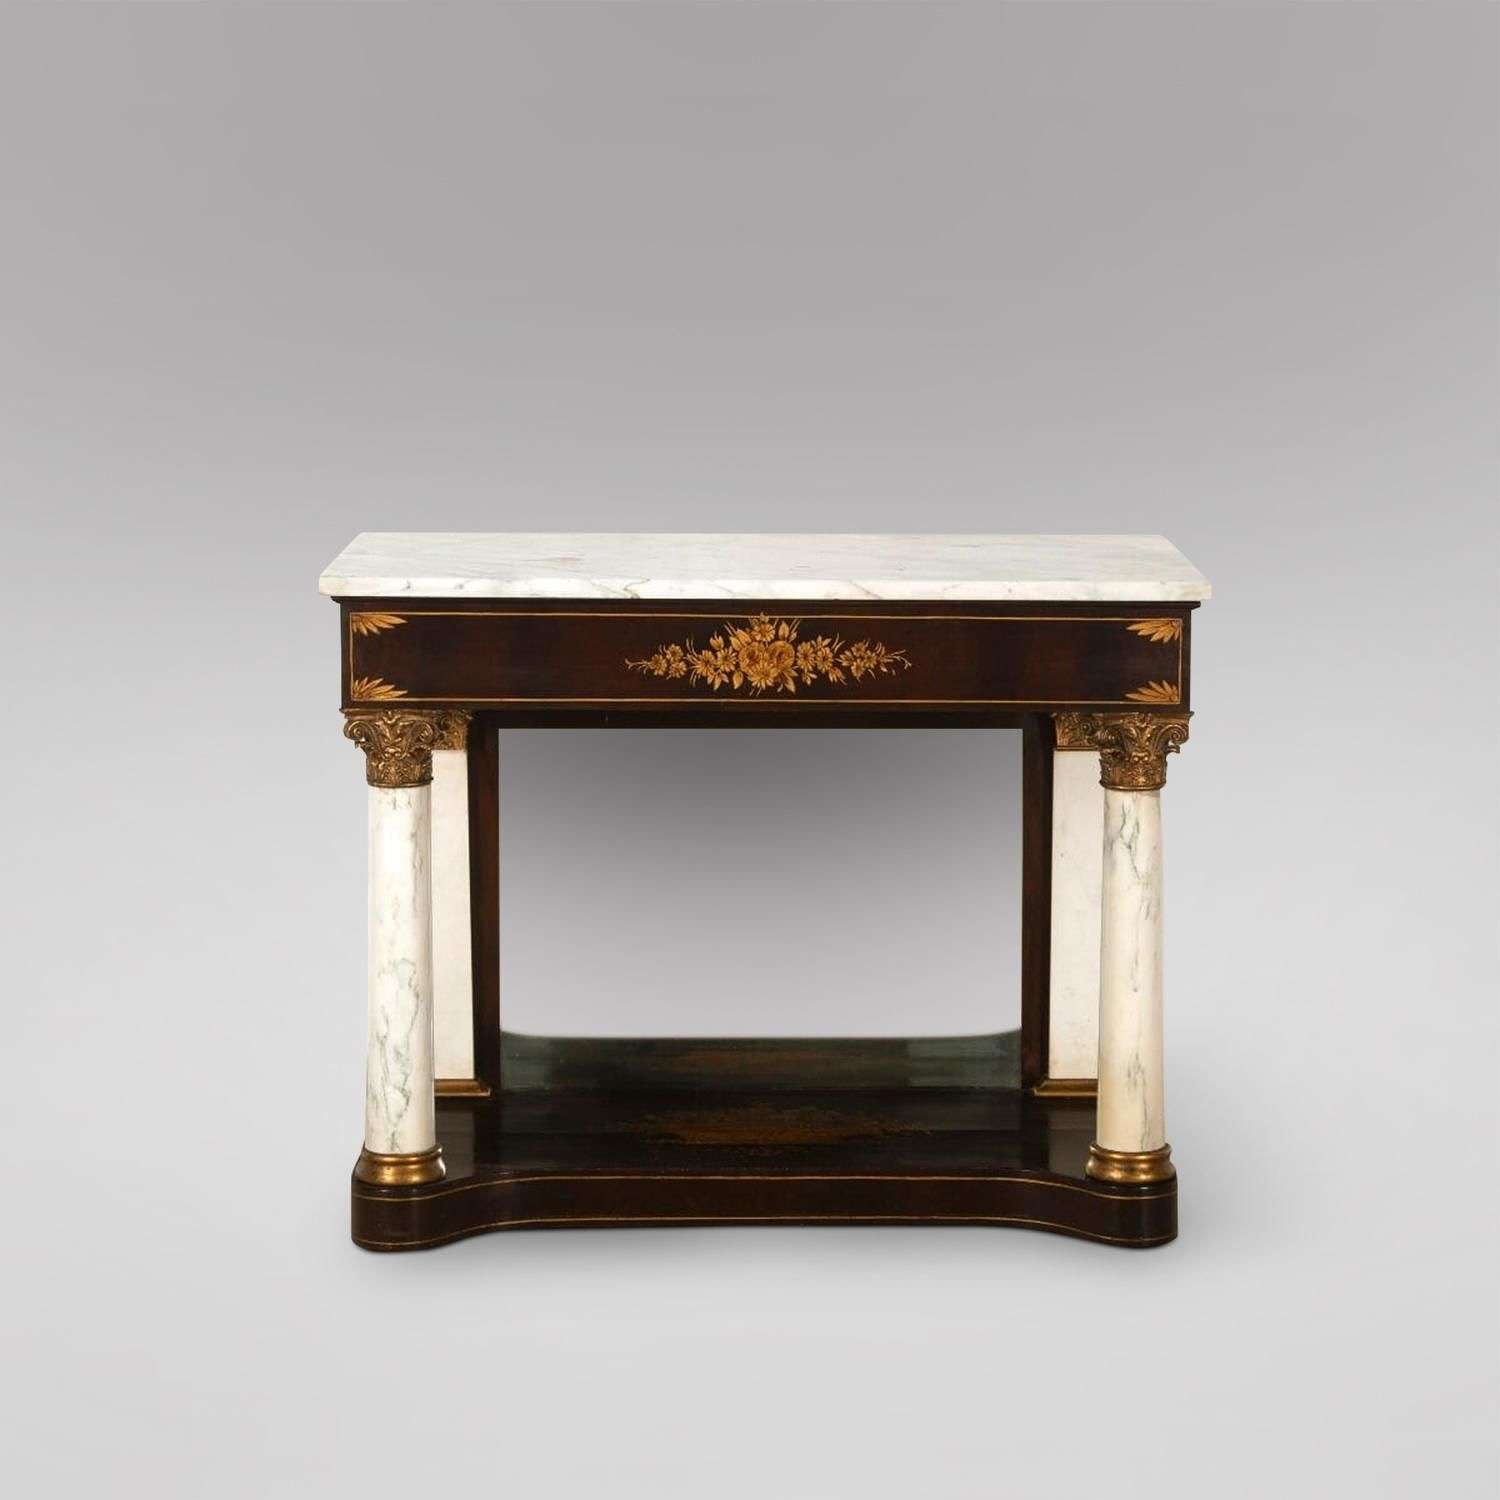 A Mahogany Console Table with Marble Top